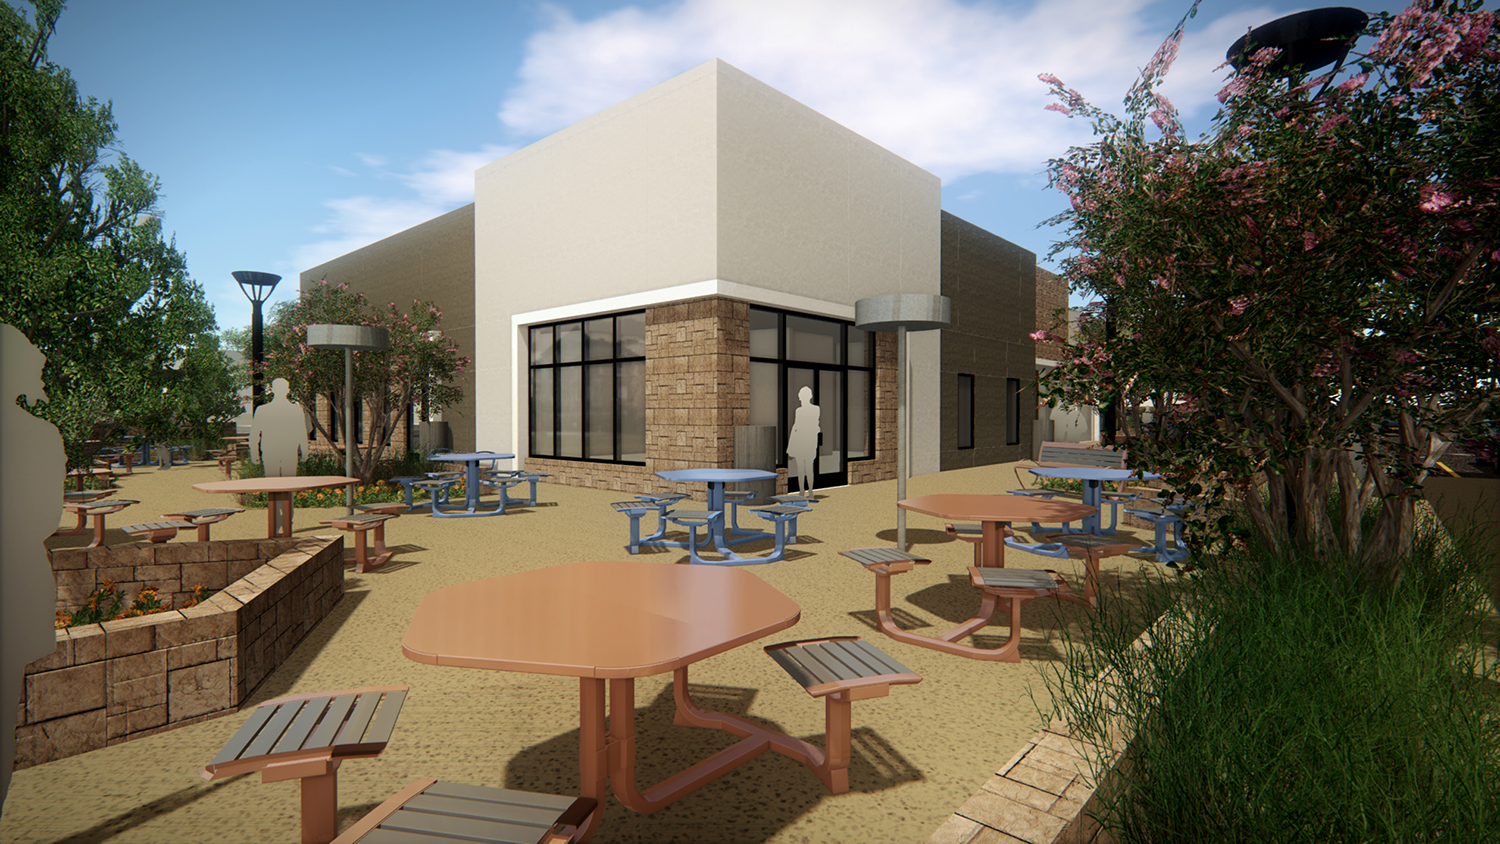 Corner view of restaurant patio and seating